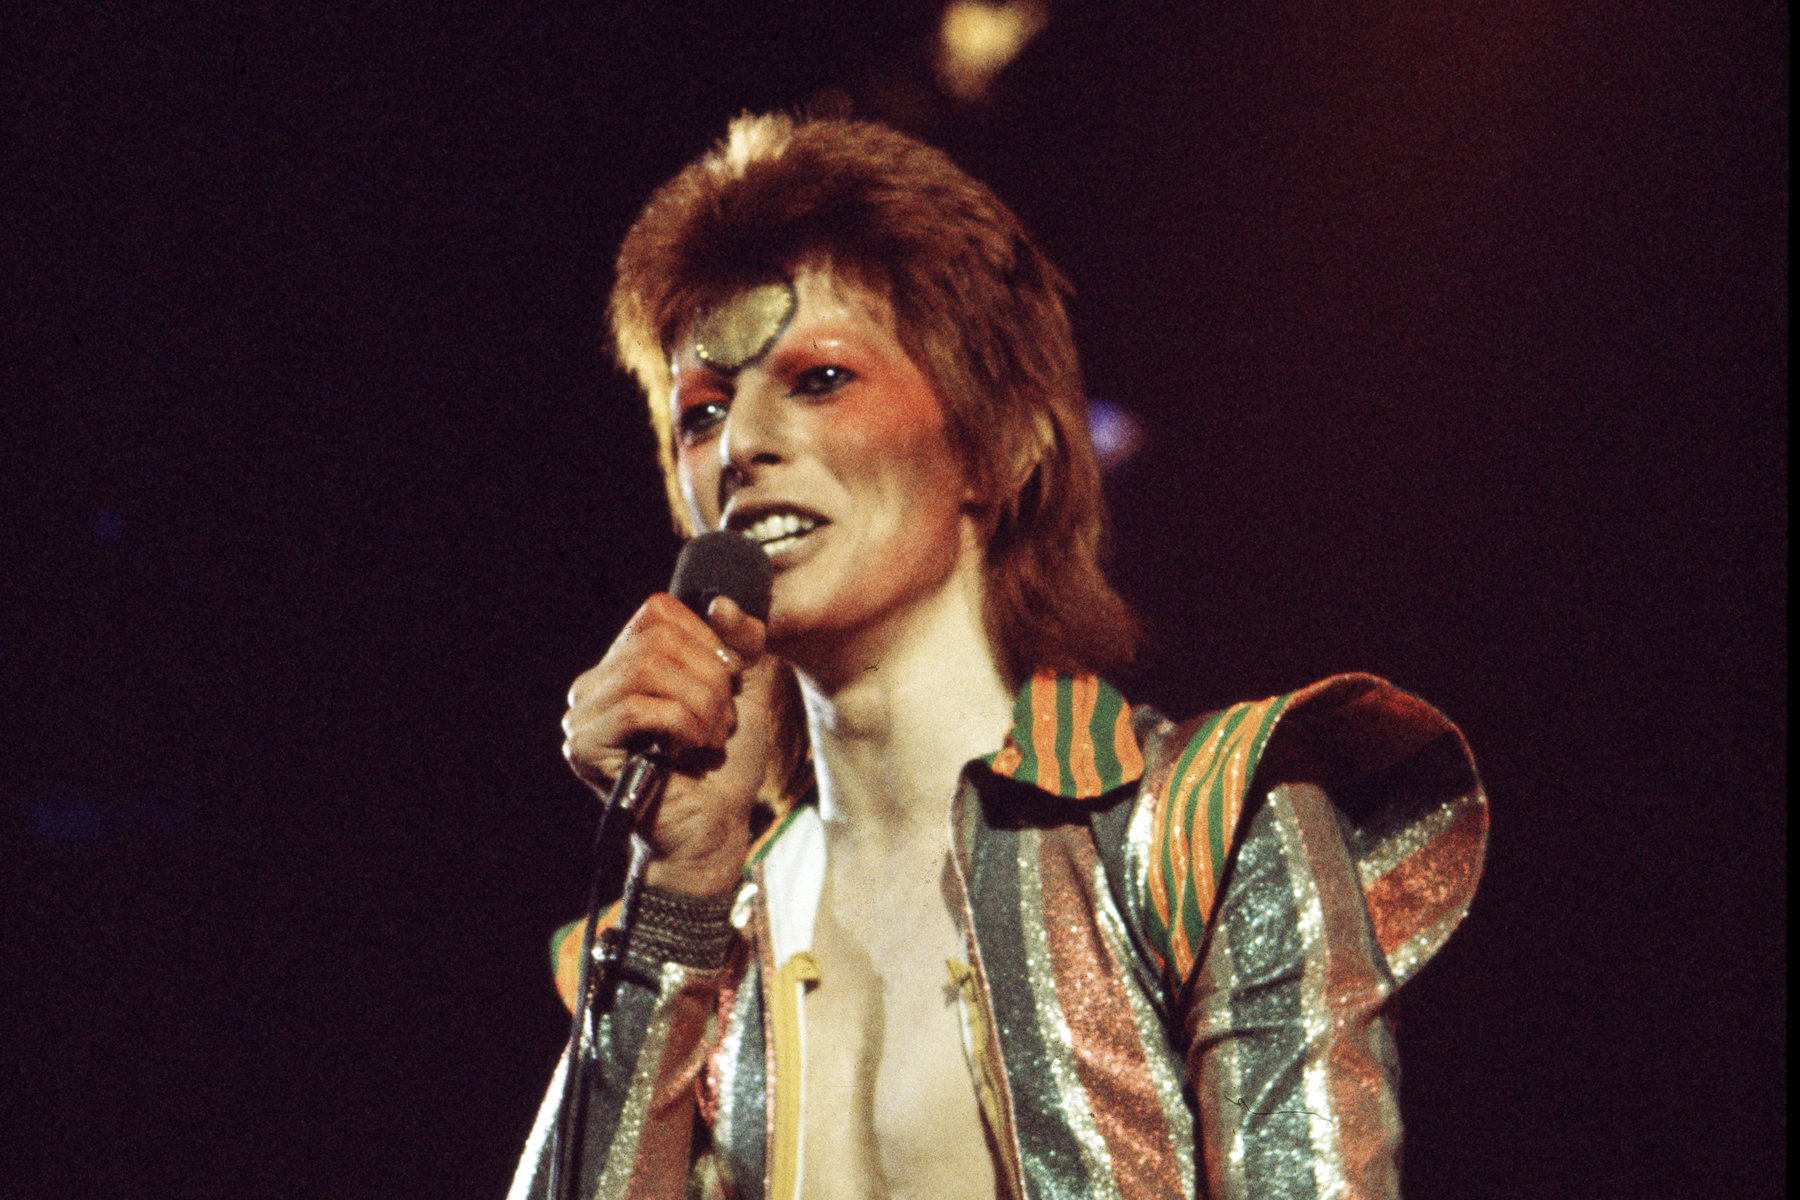 David Bowie: How Ziggy Stardust Fell to Earth